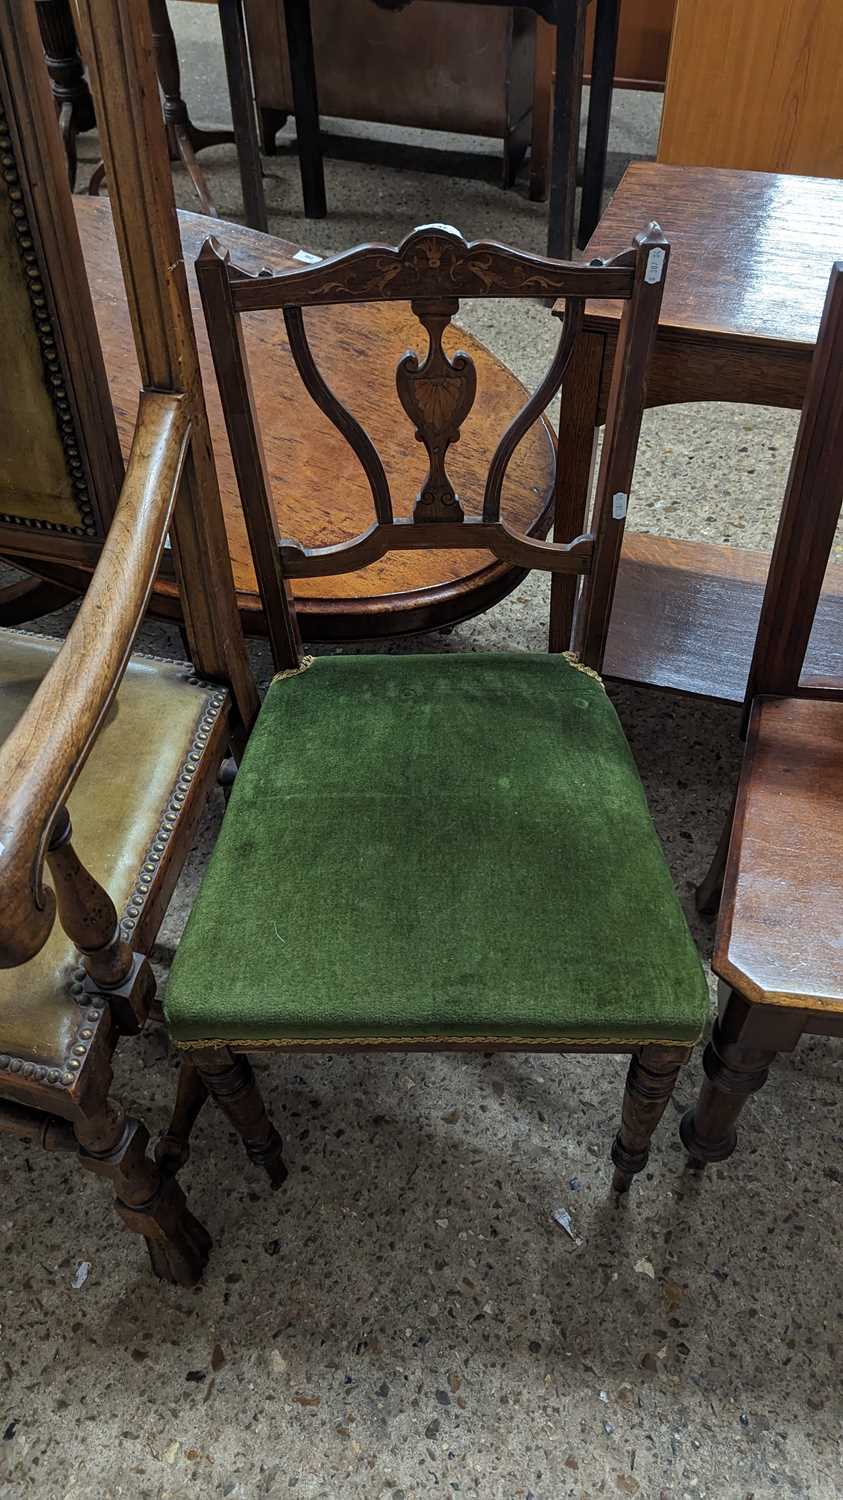 Edwardian bedroom chair with green upholstered seat